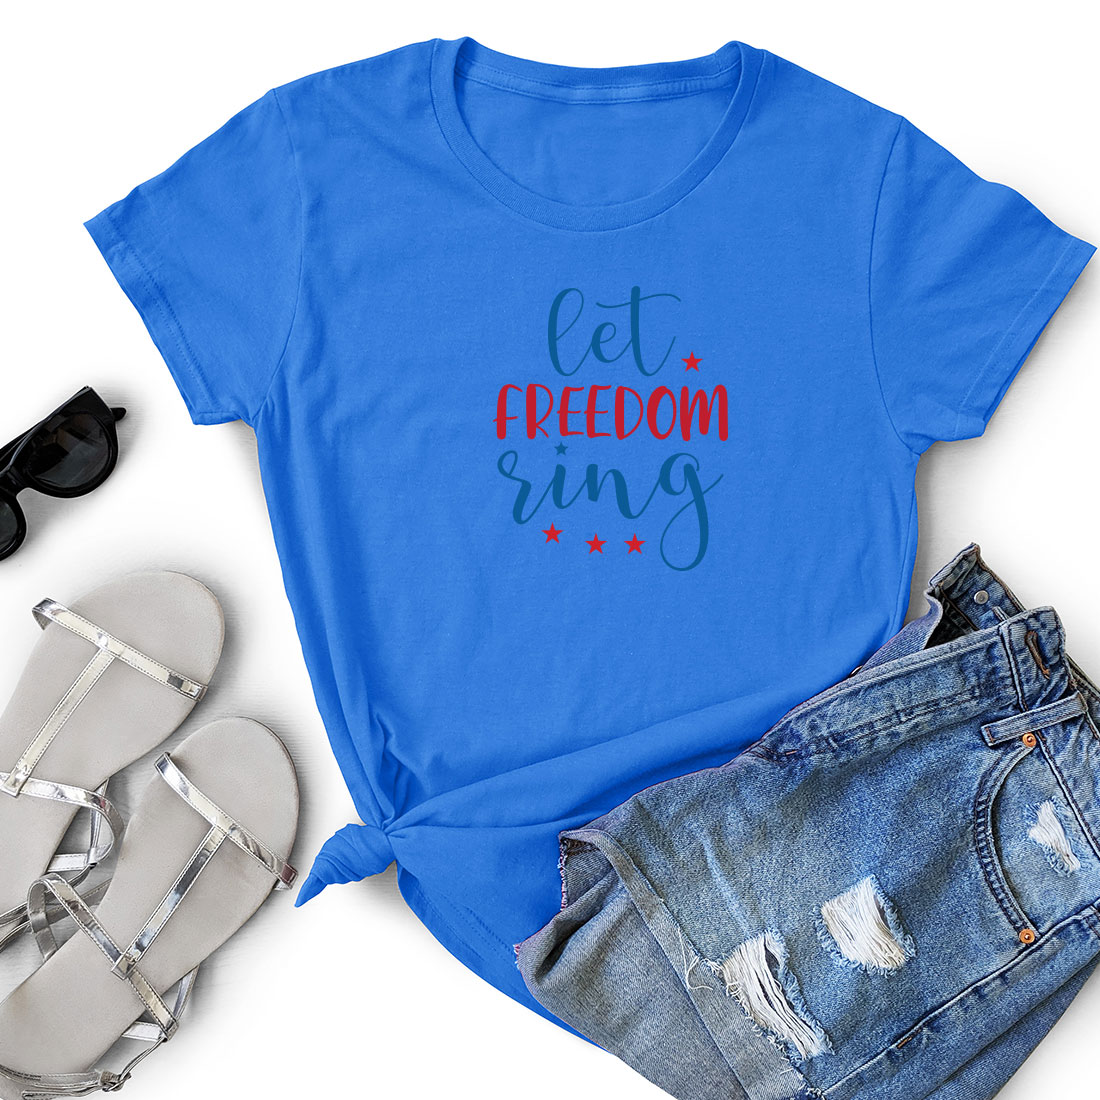 Blue t - shirt that says let freedom ring.